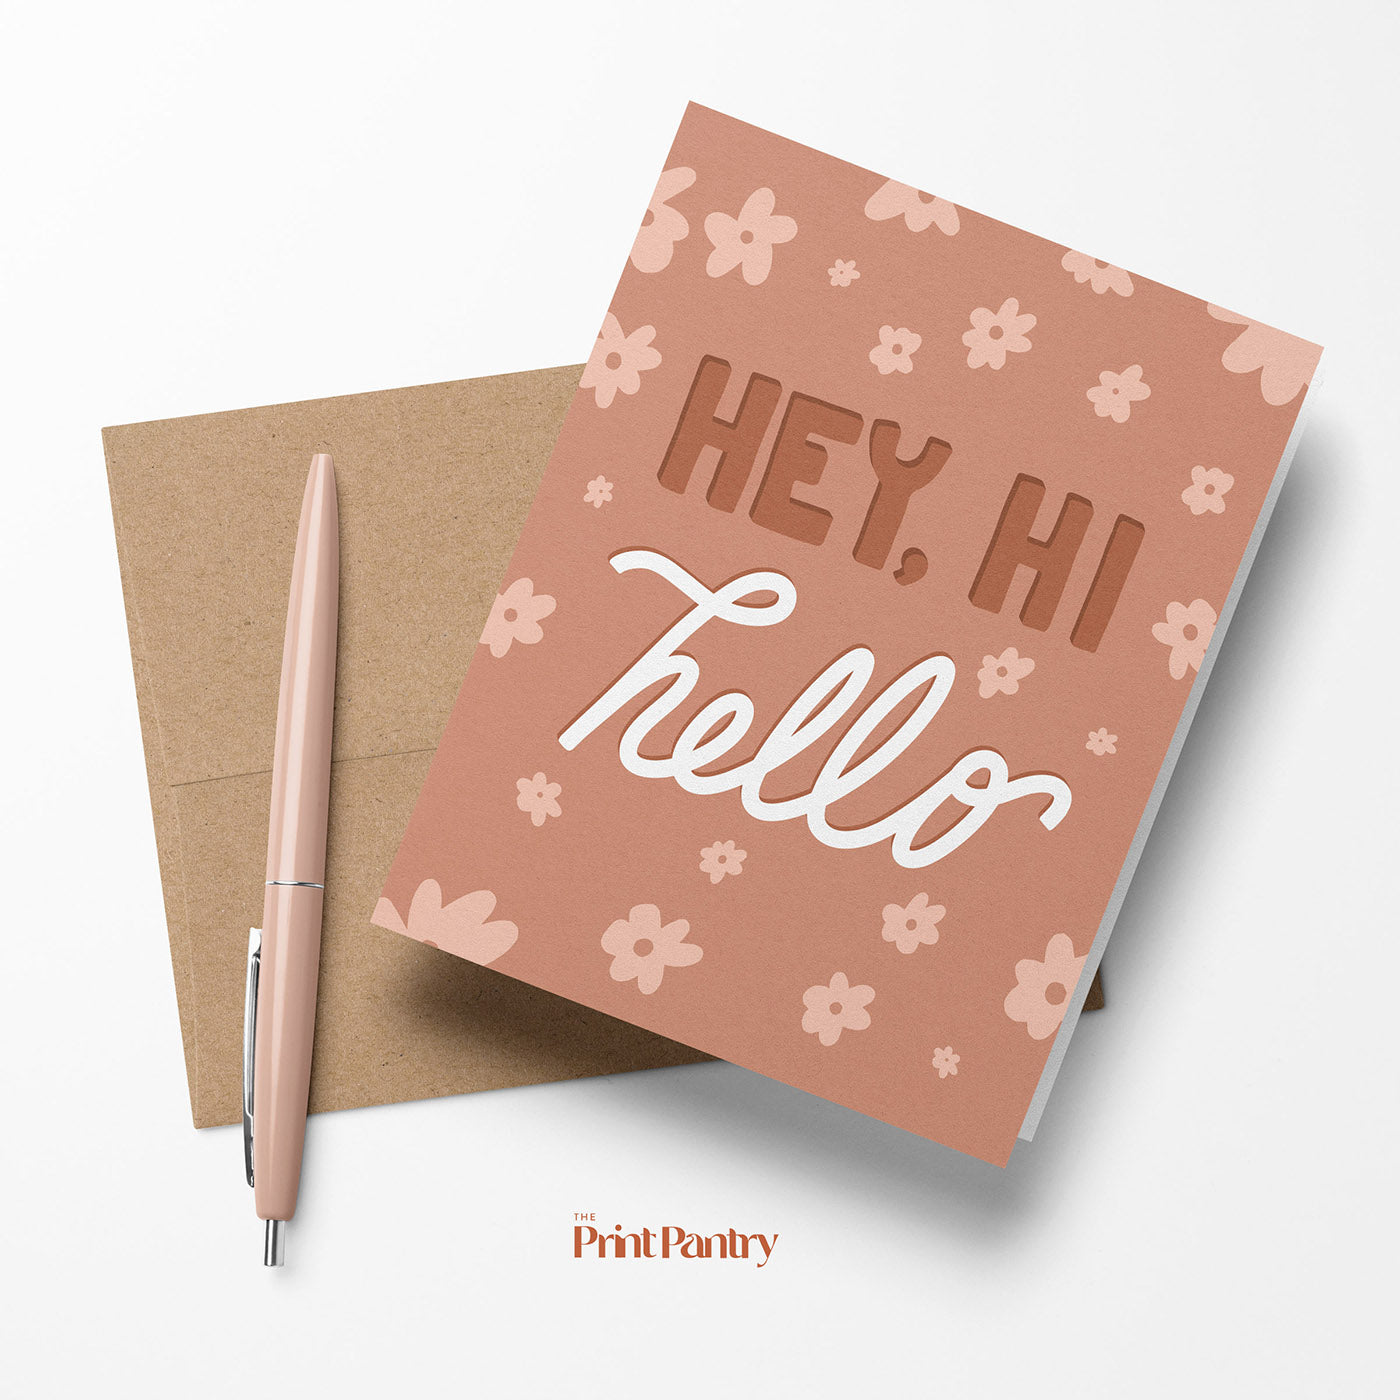 Hey, Hi, Hello Greeting Card laying with a Kraft paper envelope and pen